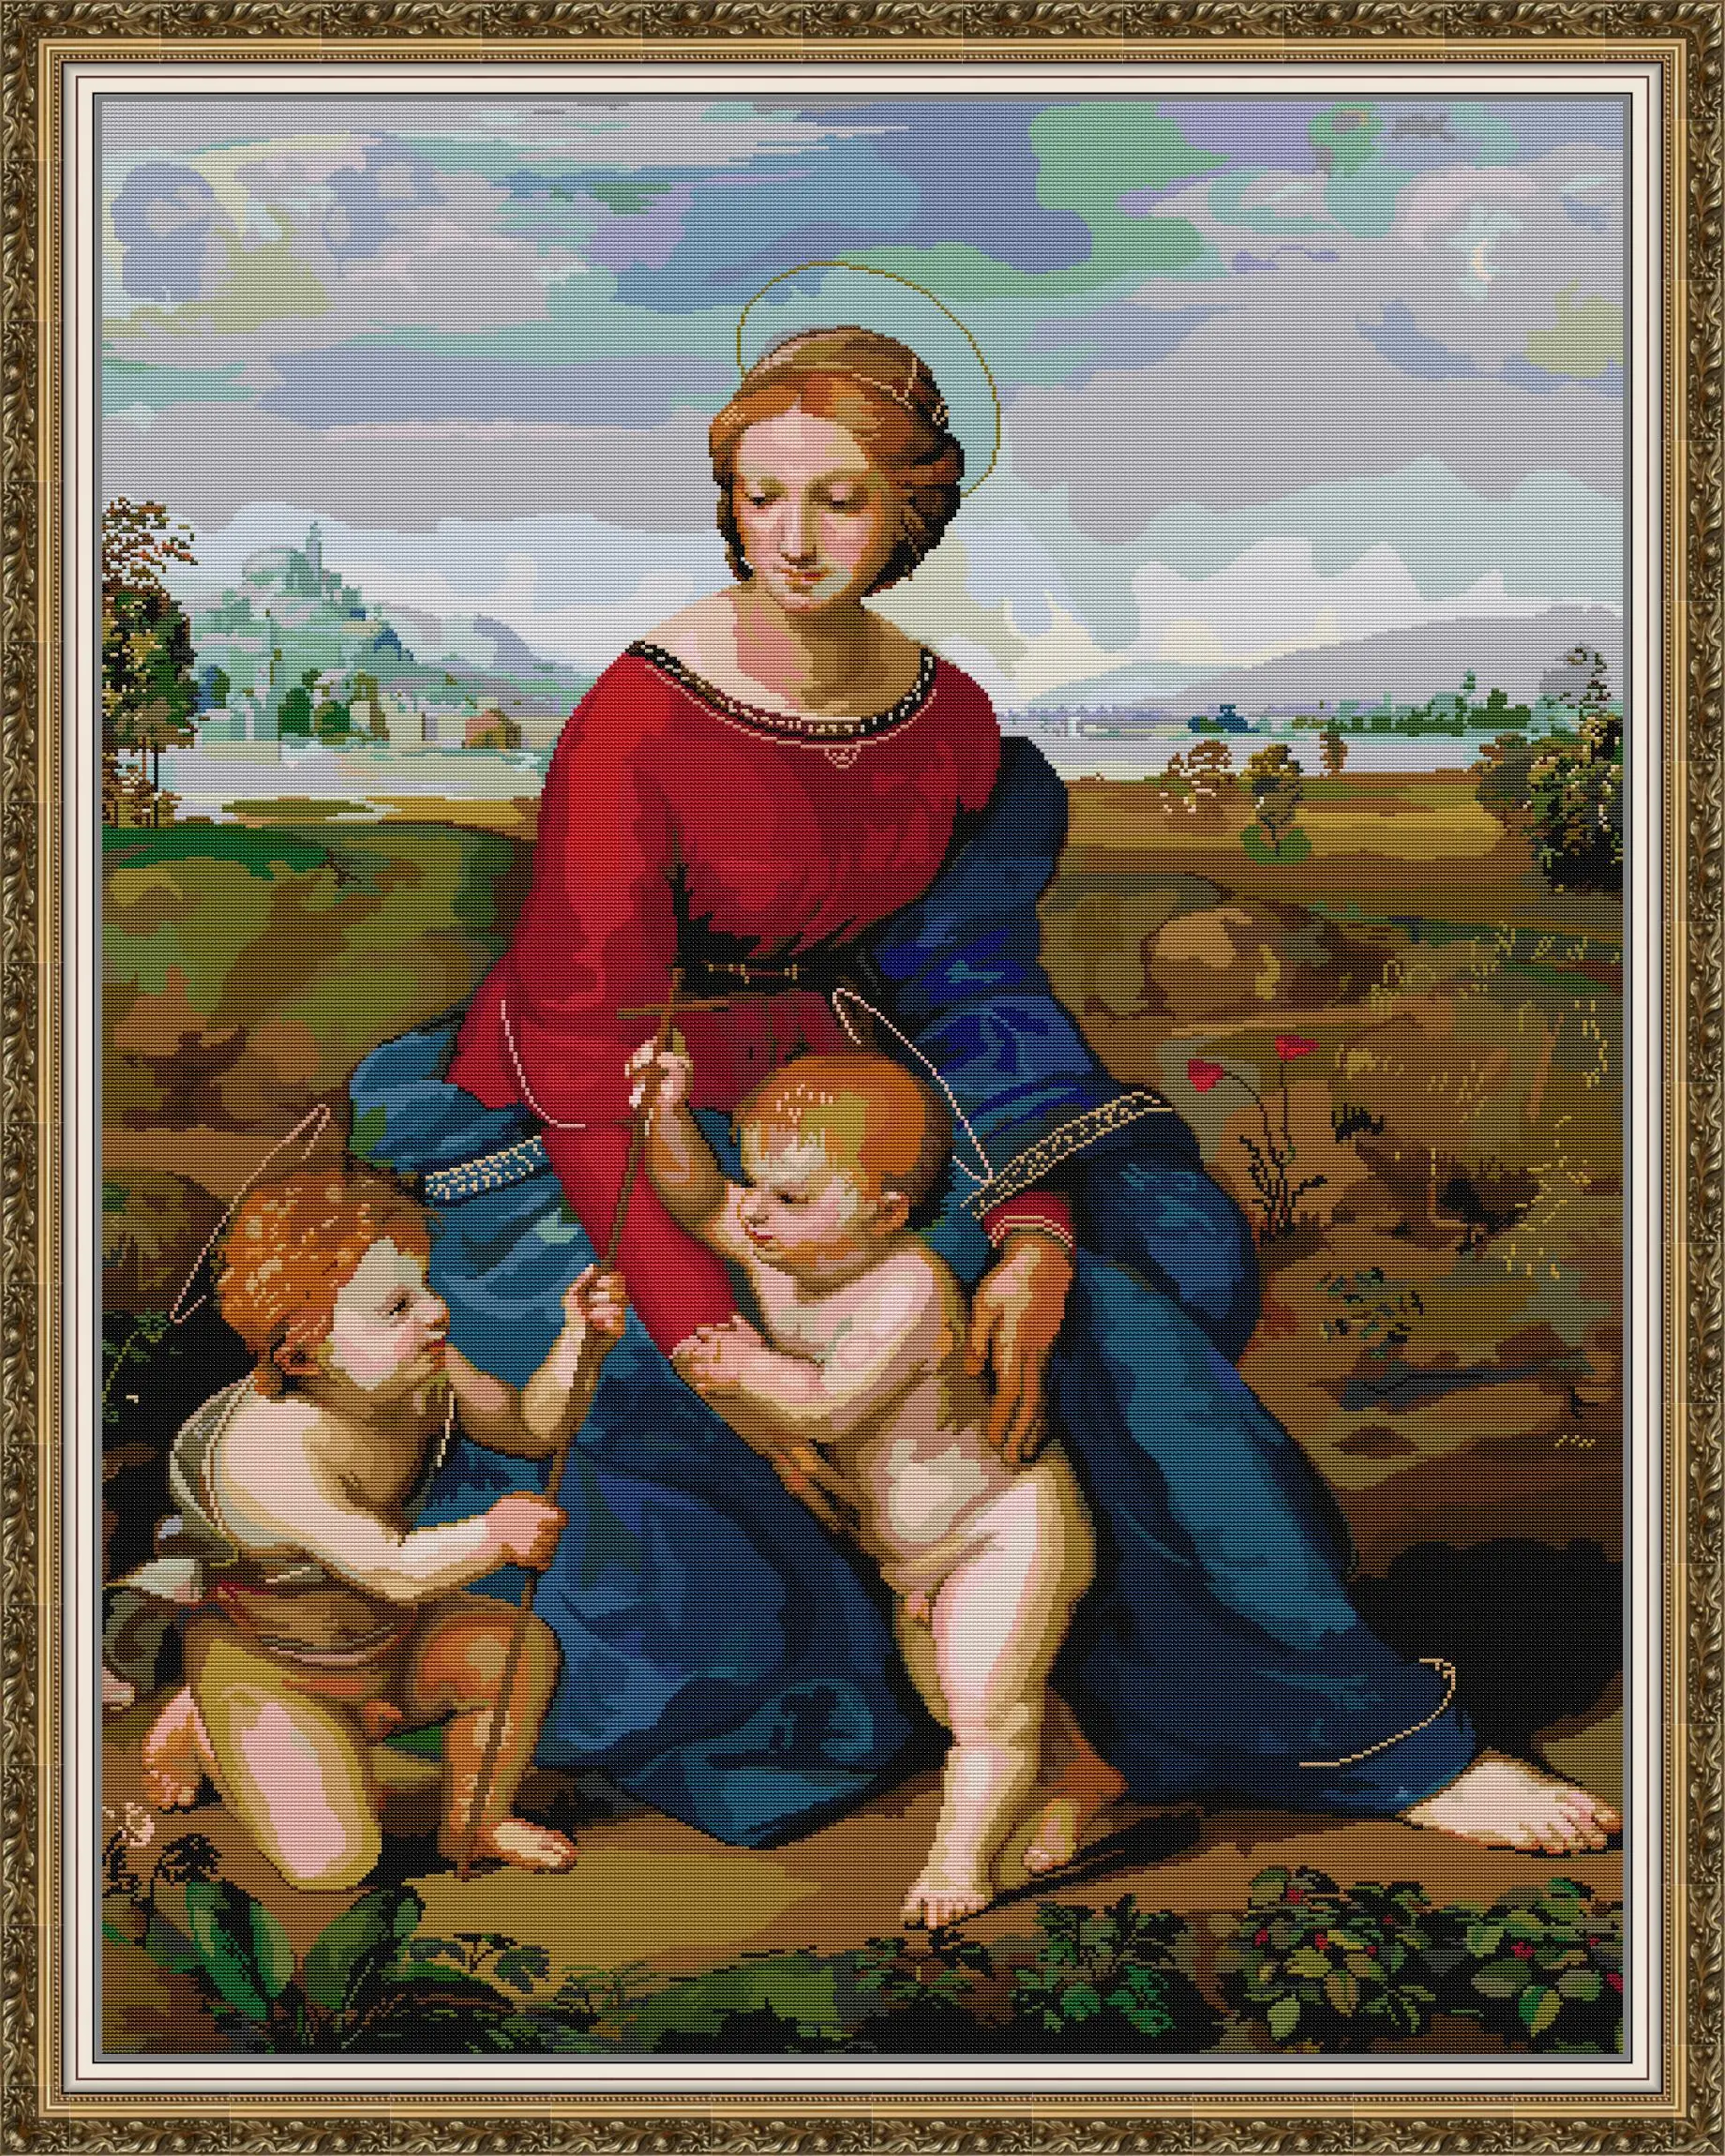 

Raphael-Our Lady on the Grass Embroidery Stamped Cross Stitch Patterns Kits Printed Canvas 11CT 14CT Needlework Cross-Stitch